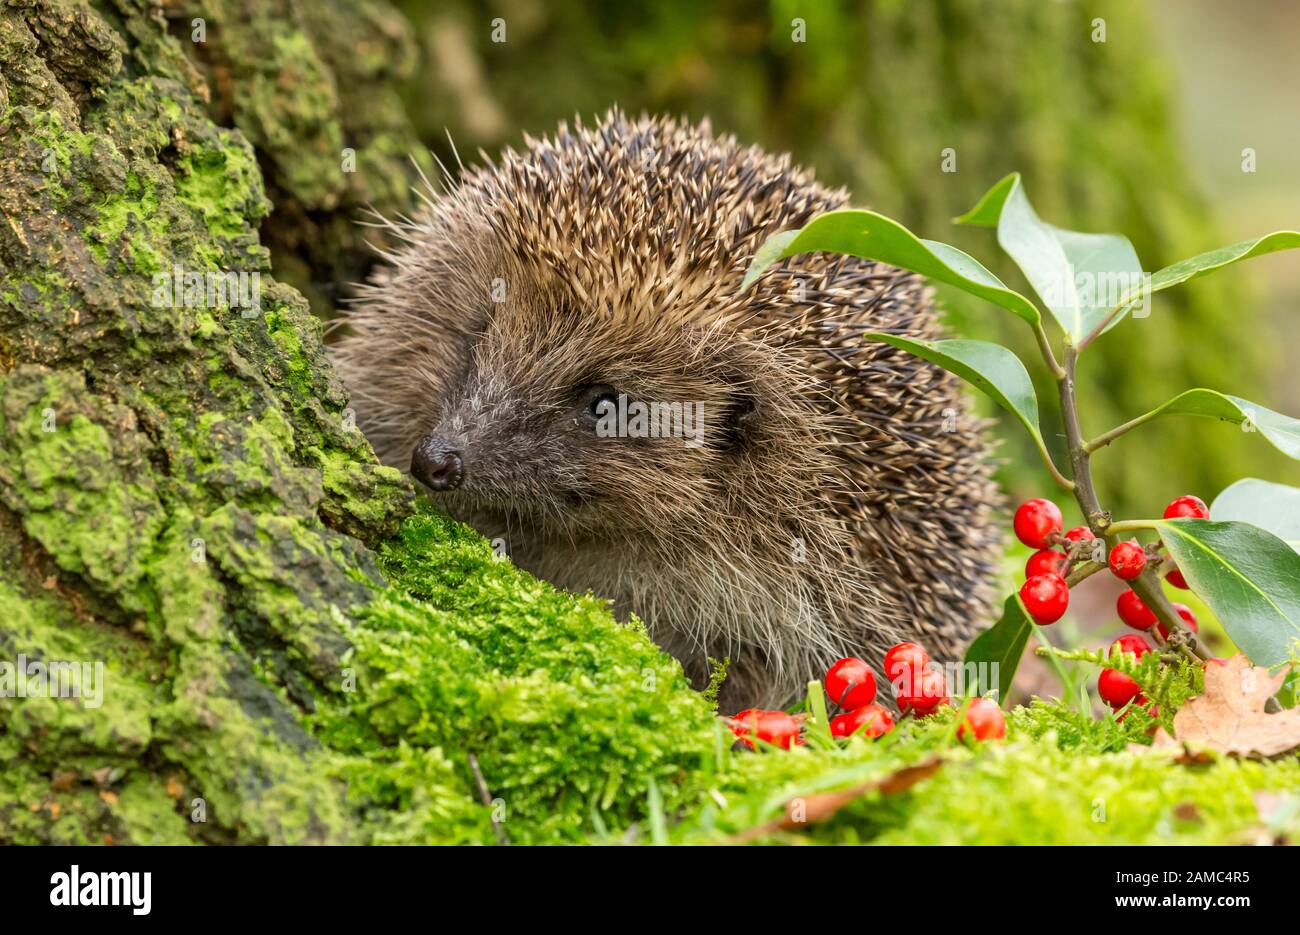 Hedgehog (Scientific name: Erinaceus europaeus) in natural woodland habitat, peeping over a tree stump with green moss and red Holly berries. Stock Photo